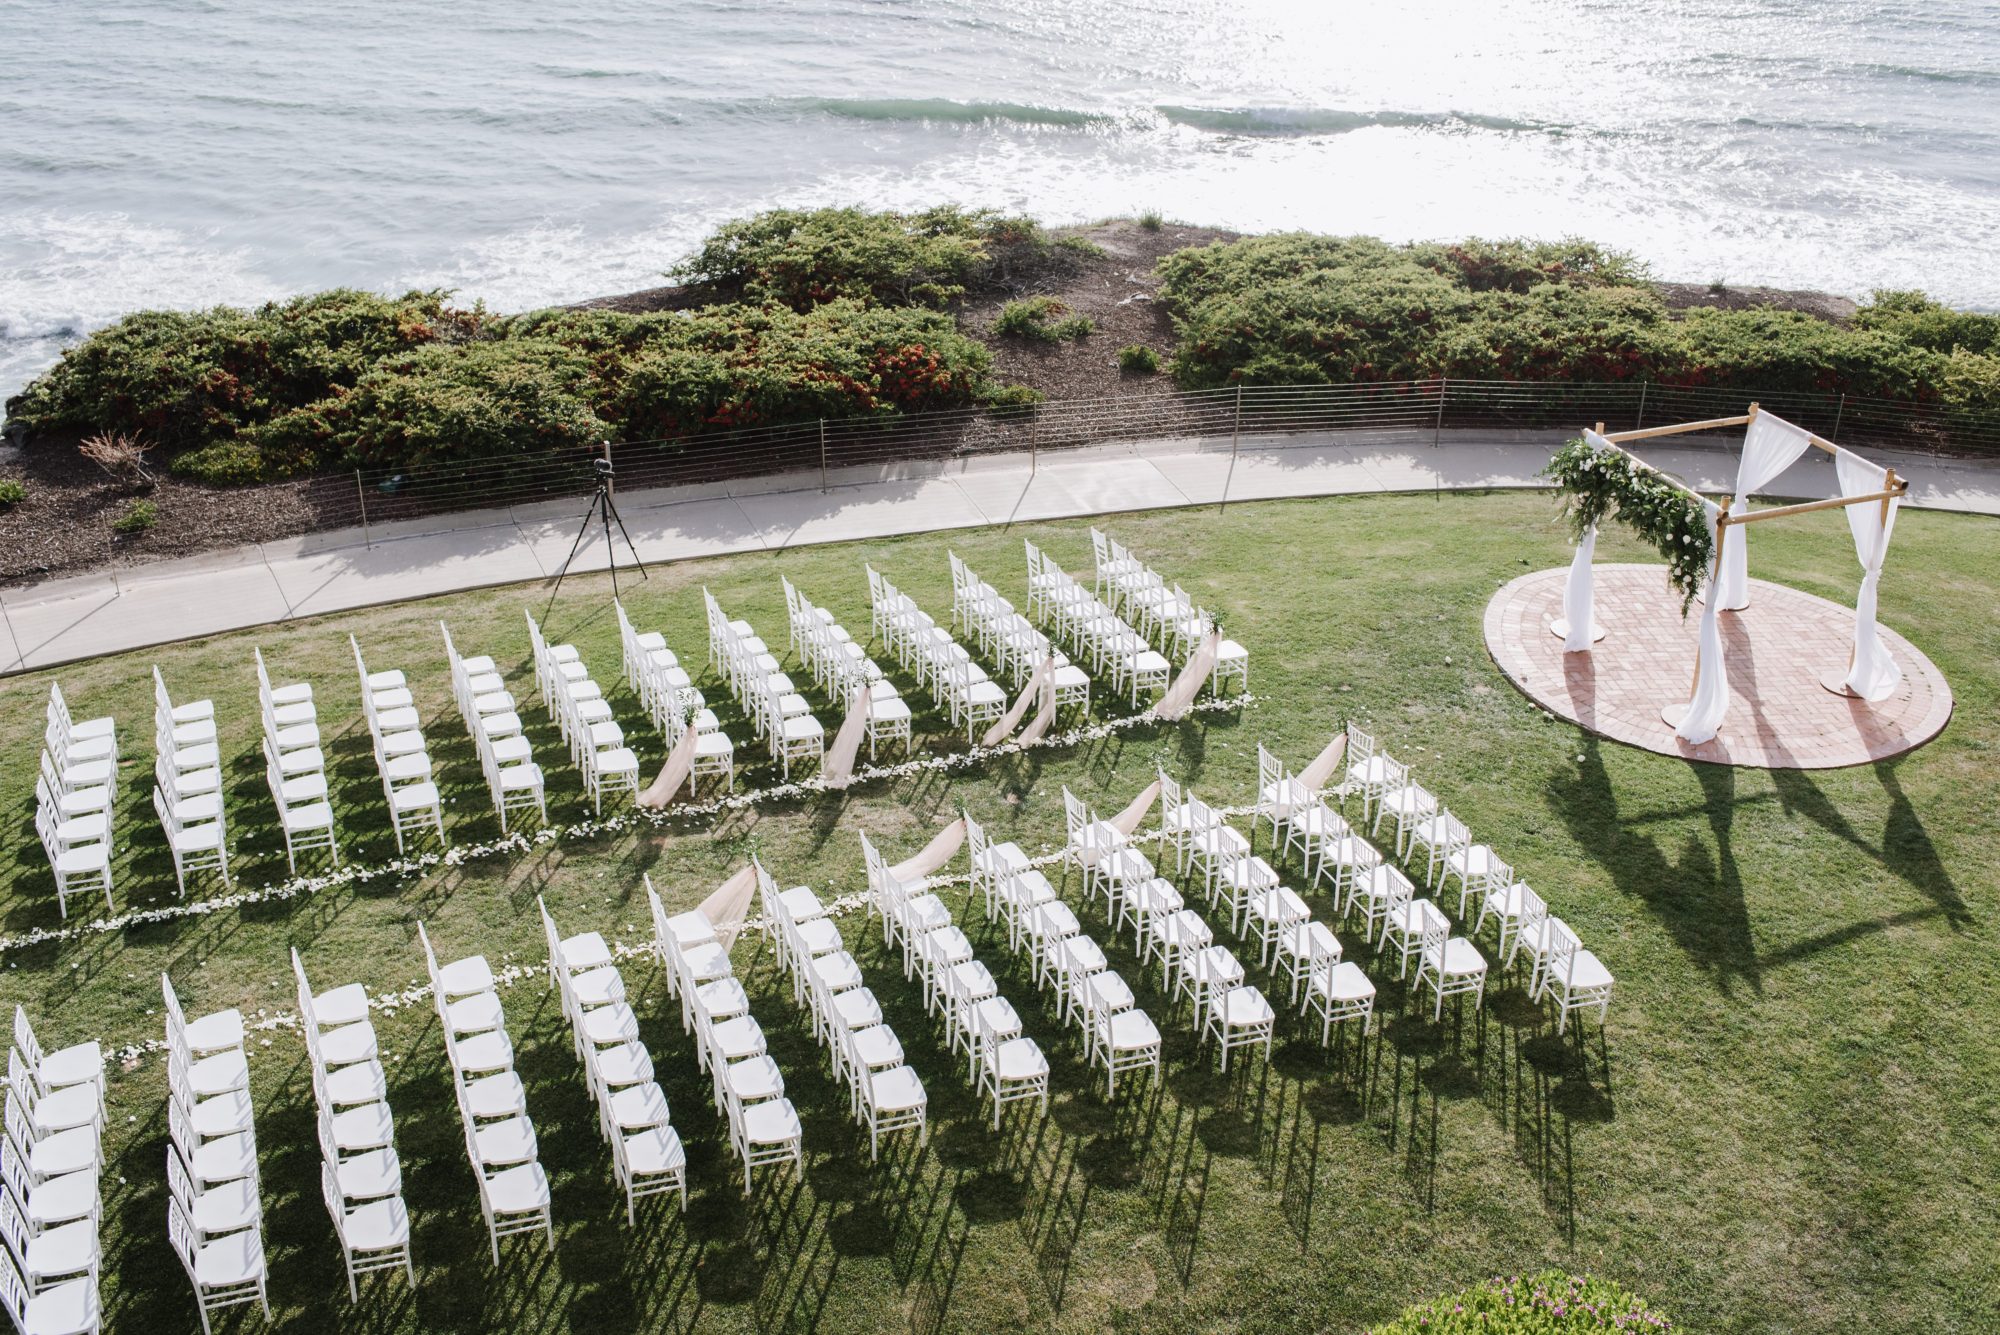 Wedding ceremony venue. White chairs are lined up in front of a wedding arbor with white drapery and flowers.